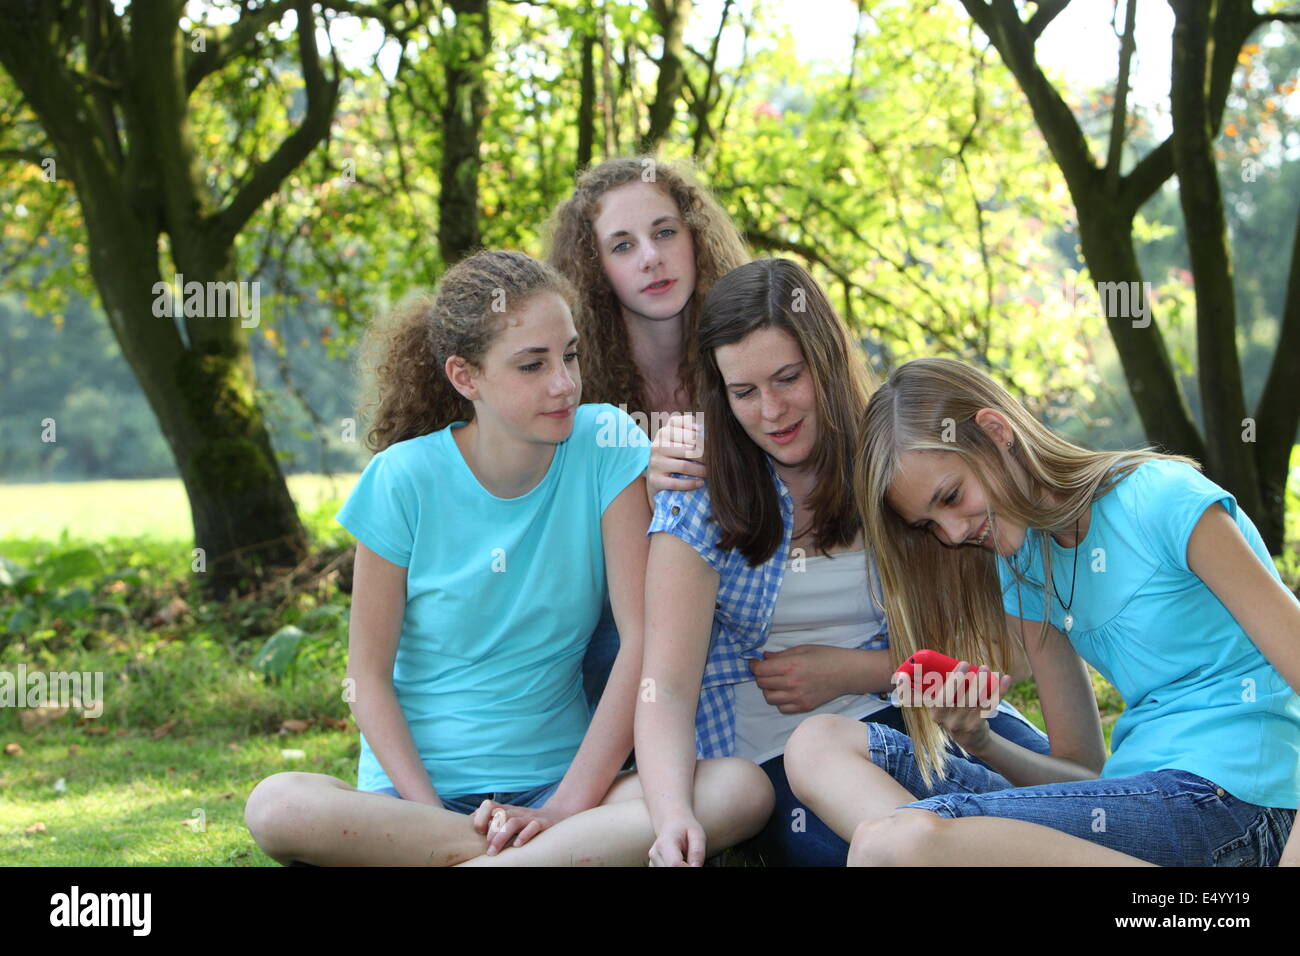 Group of young girls sitting in a park Stock Photo